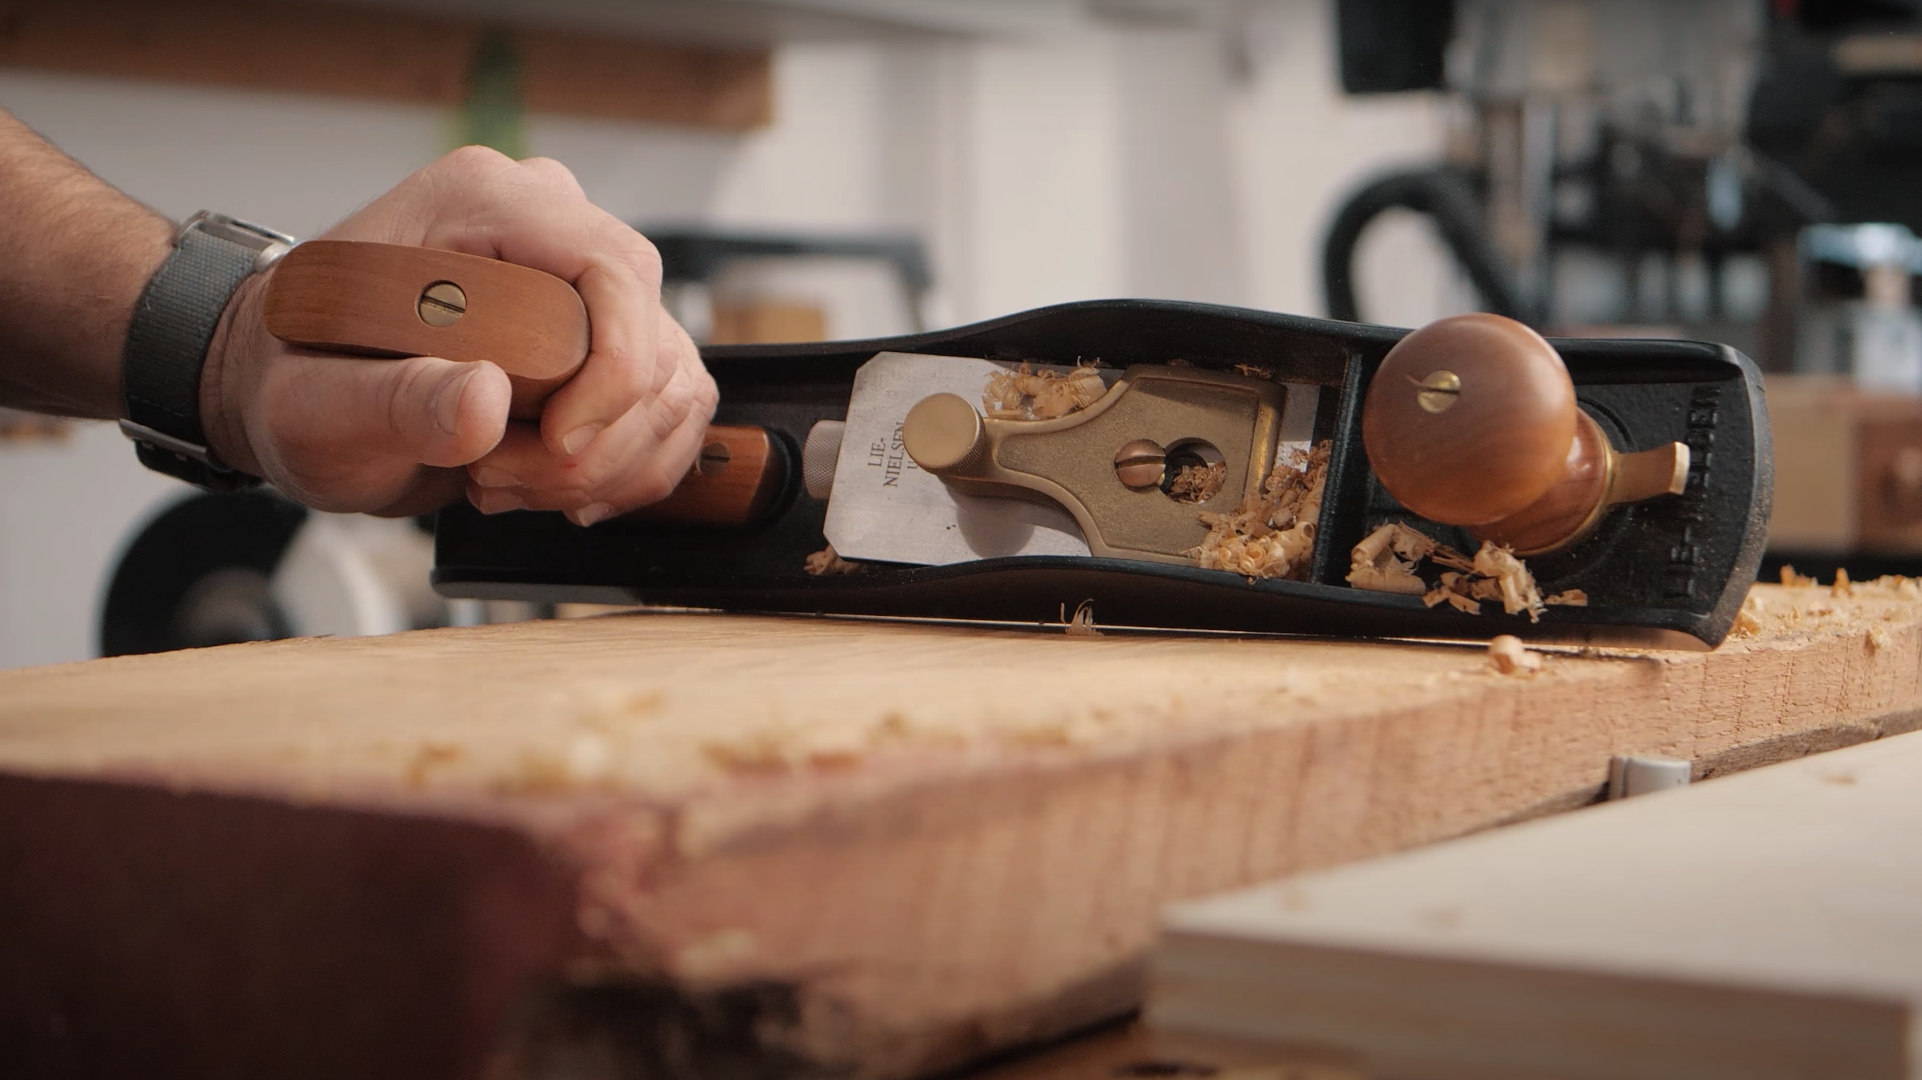 Testing the flatness of a board with a hand plane